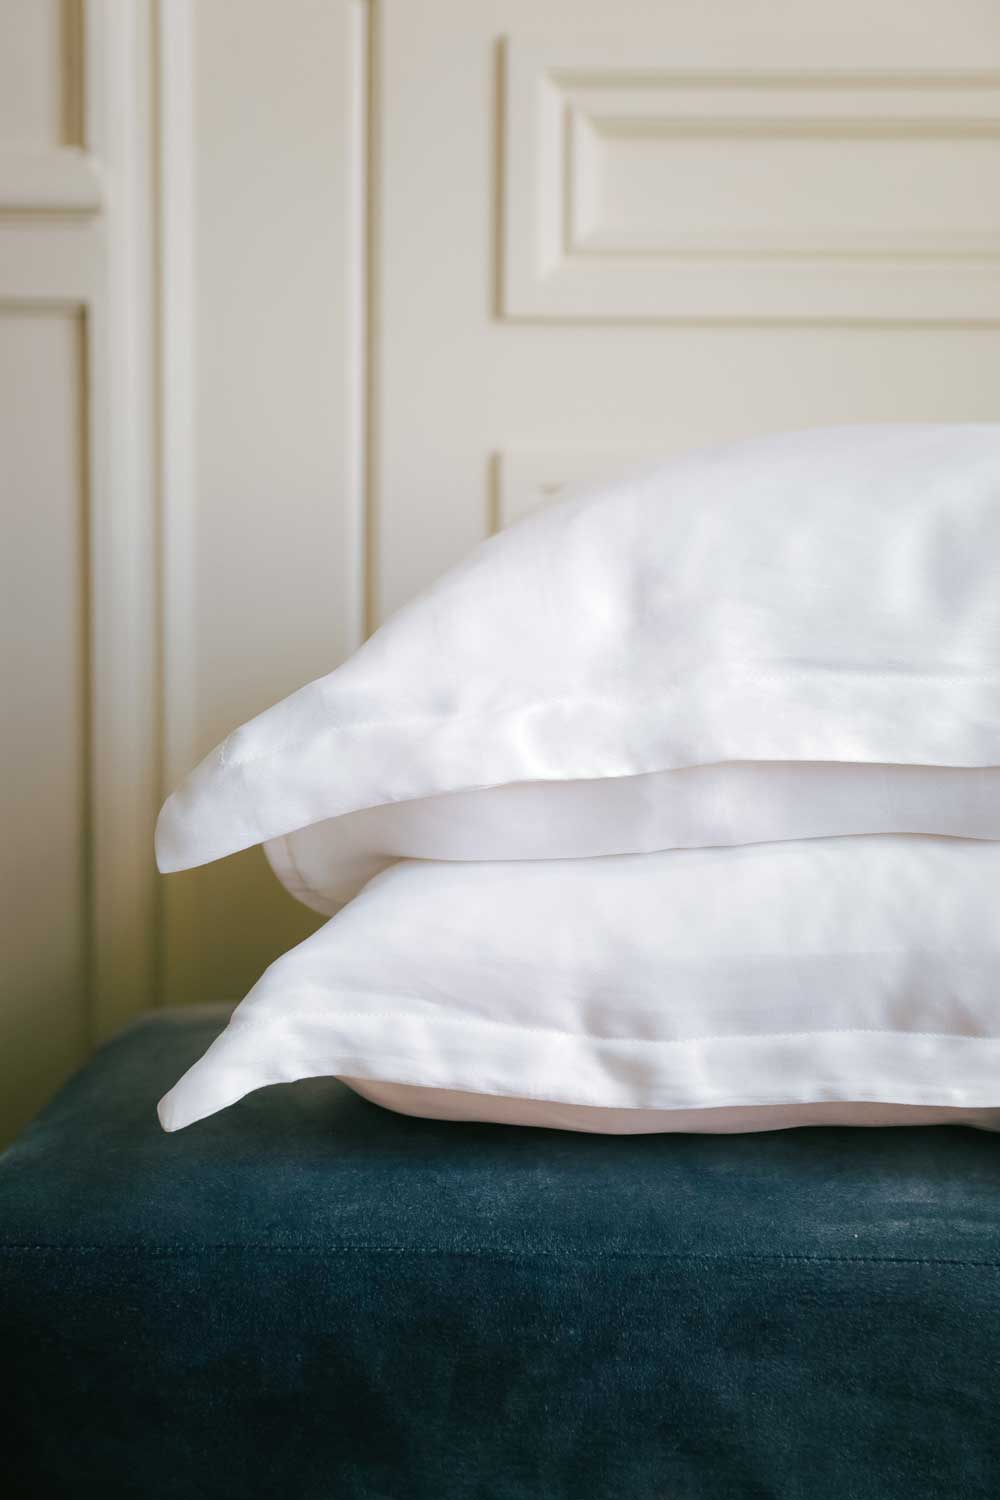 Two pillows with white pillowcases made with silk from orange peel on a blue teal velvet sofa.